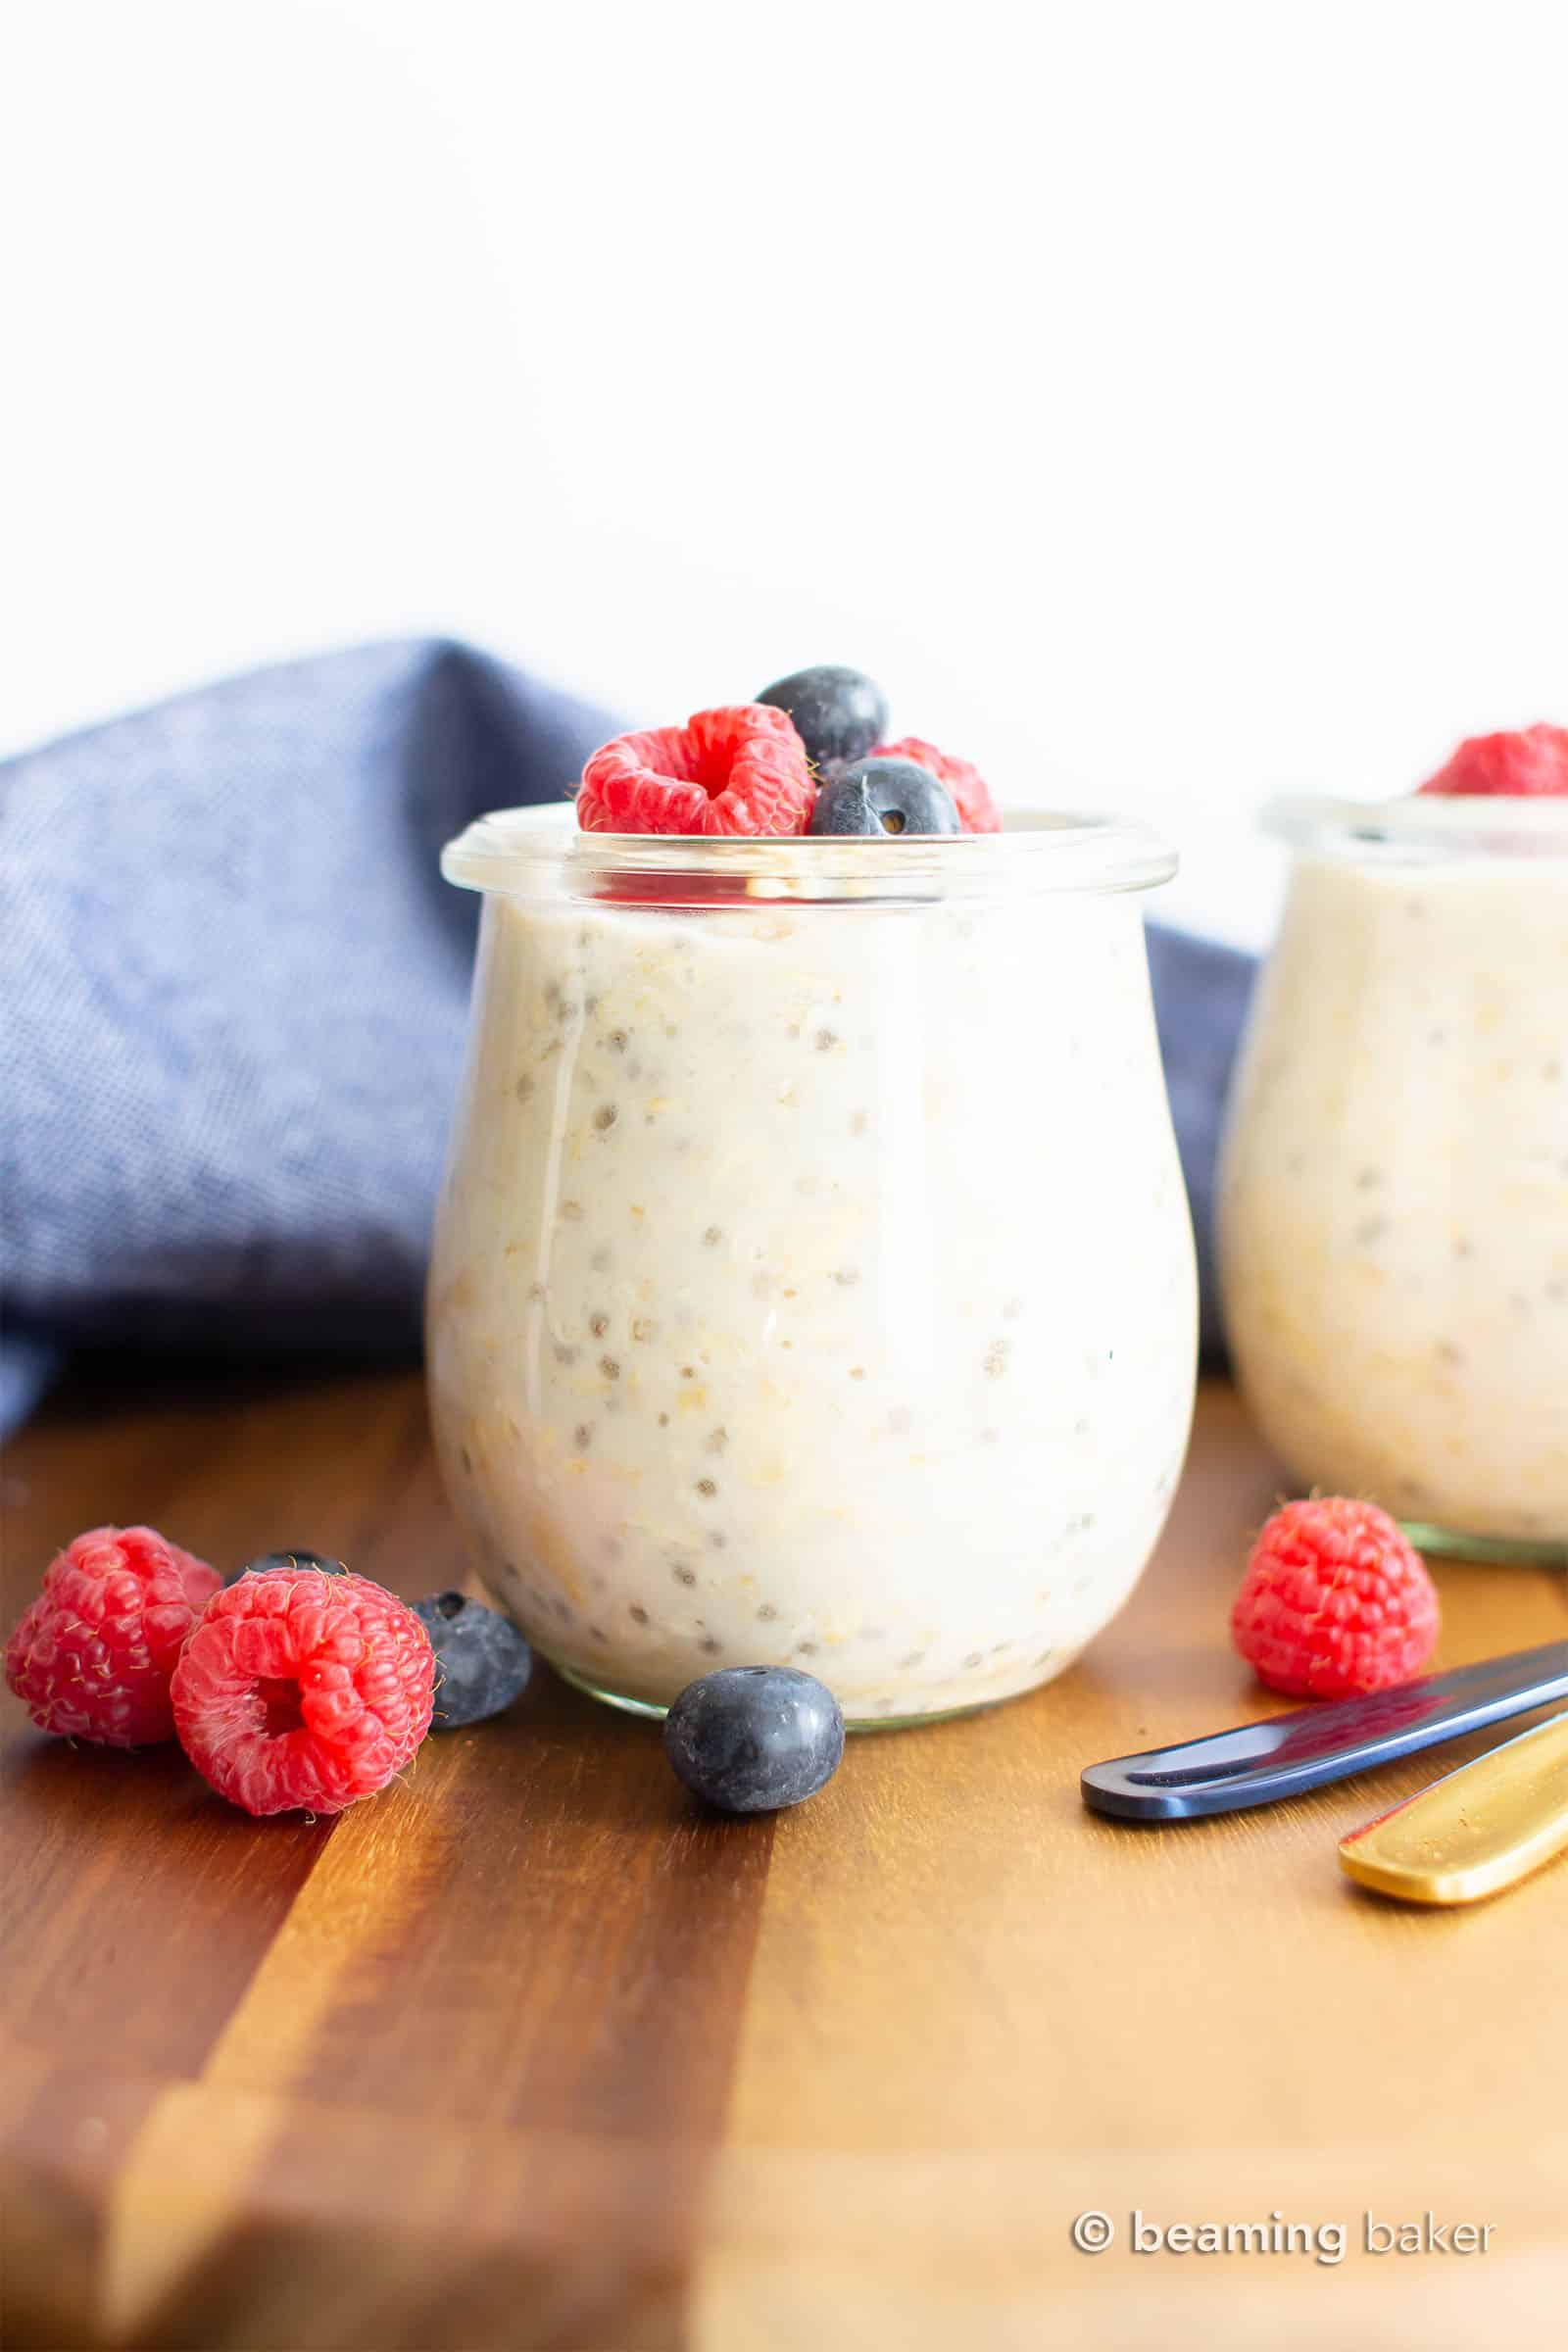 Classic Overnight Oats Recipe (Vegan): quick & easy vegan overnight oats! Creamy, satisfying & fiber-rich. Prepare breakfast in just a few minutes the night before! Healthy, Gluten Free, Dairy-Free. #OvernightOats #Vegan #Breakfast #Healthy | Recipe at BeamingBaker.com